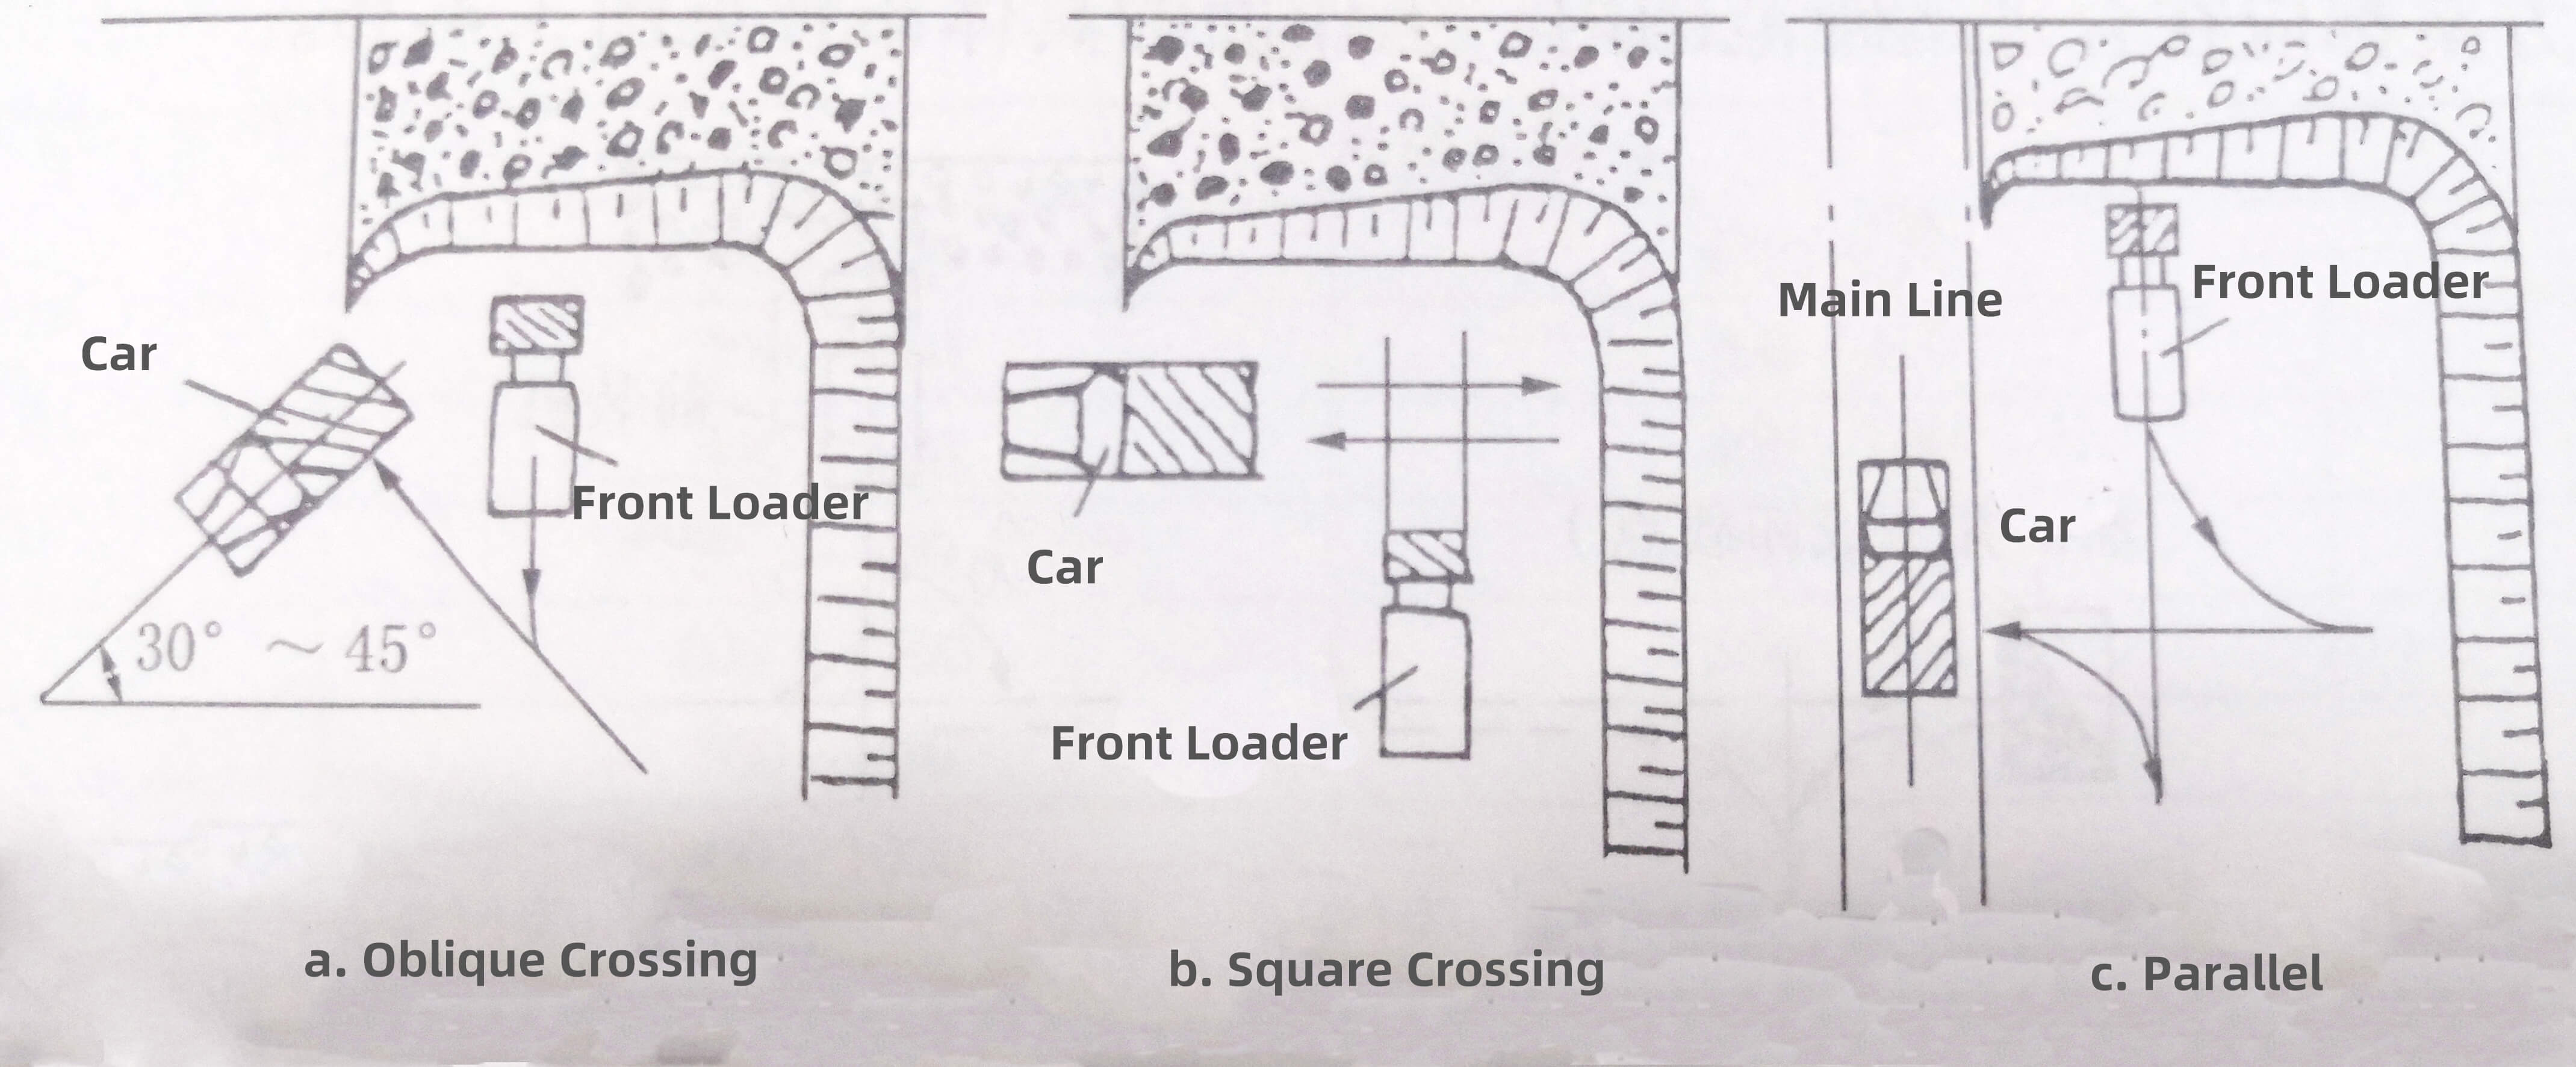 Front Loader and Automobile Layout.jpg